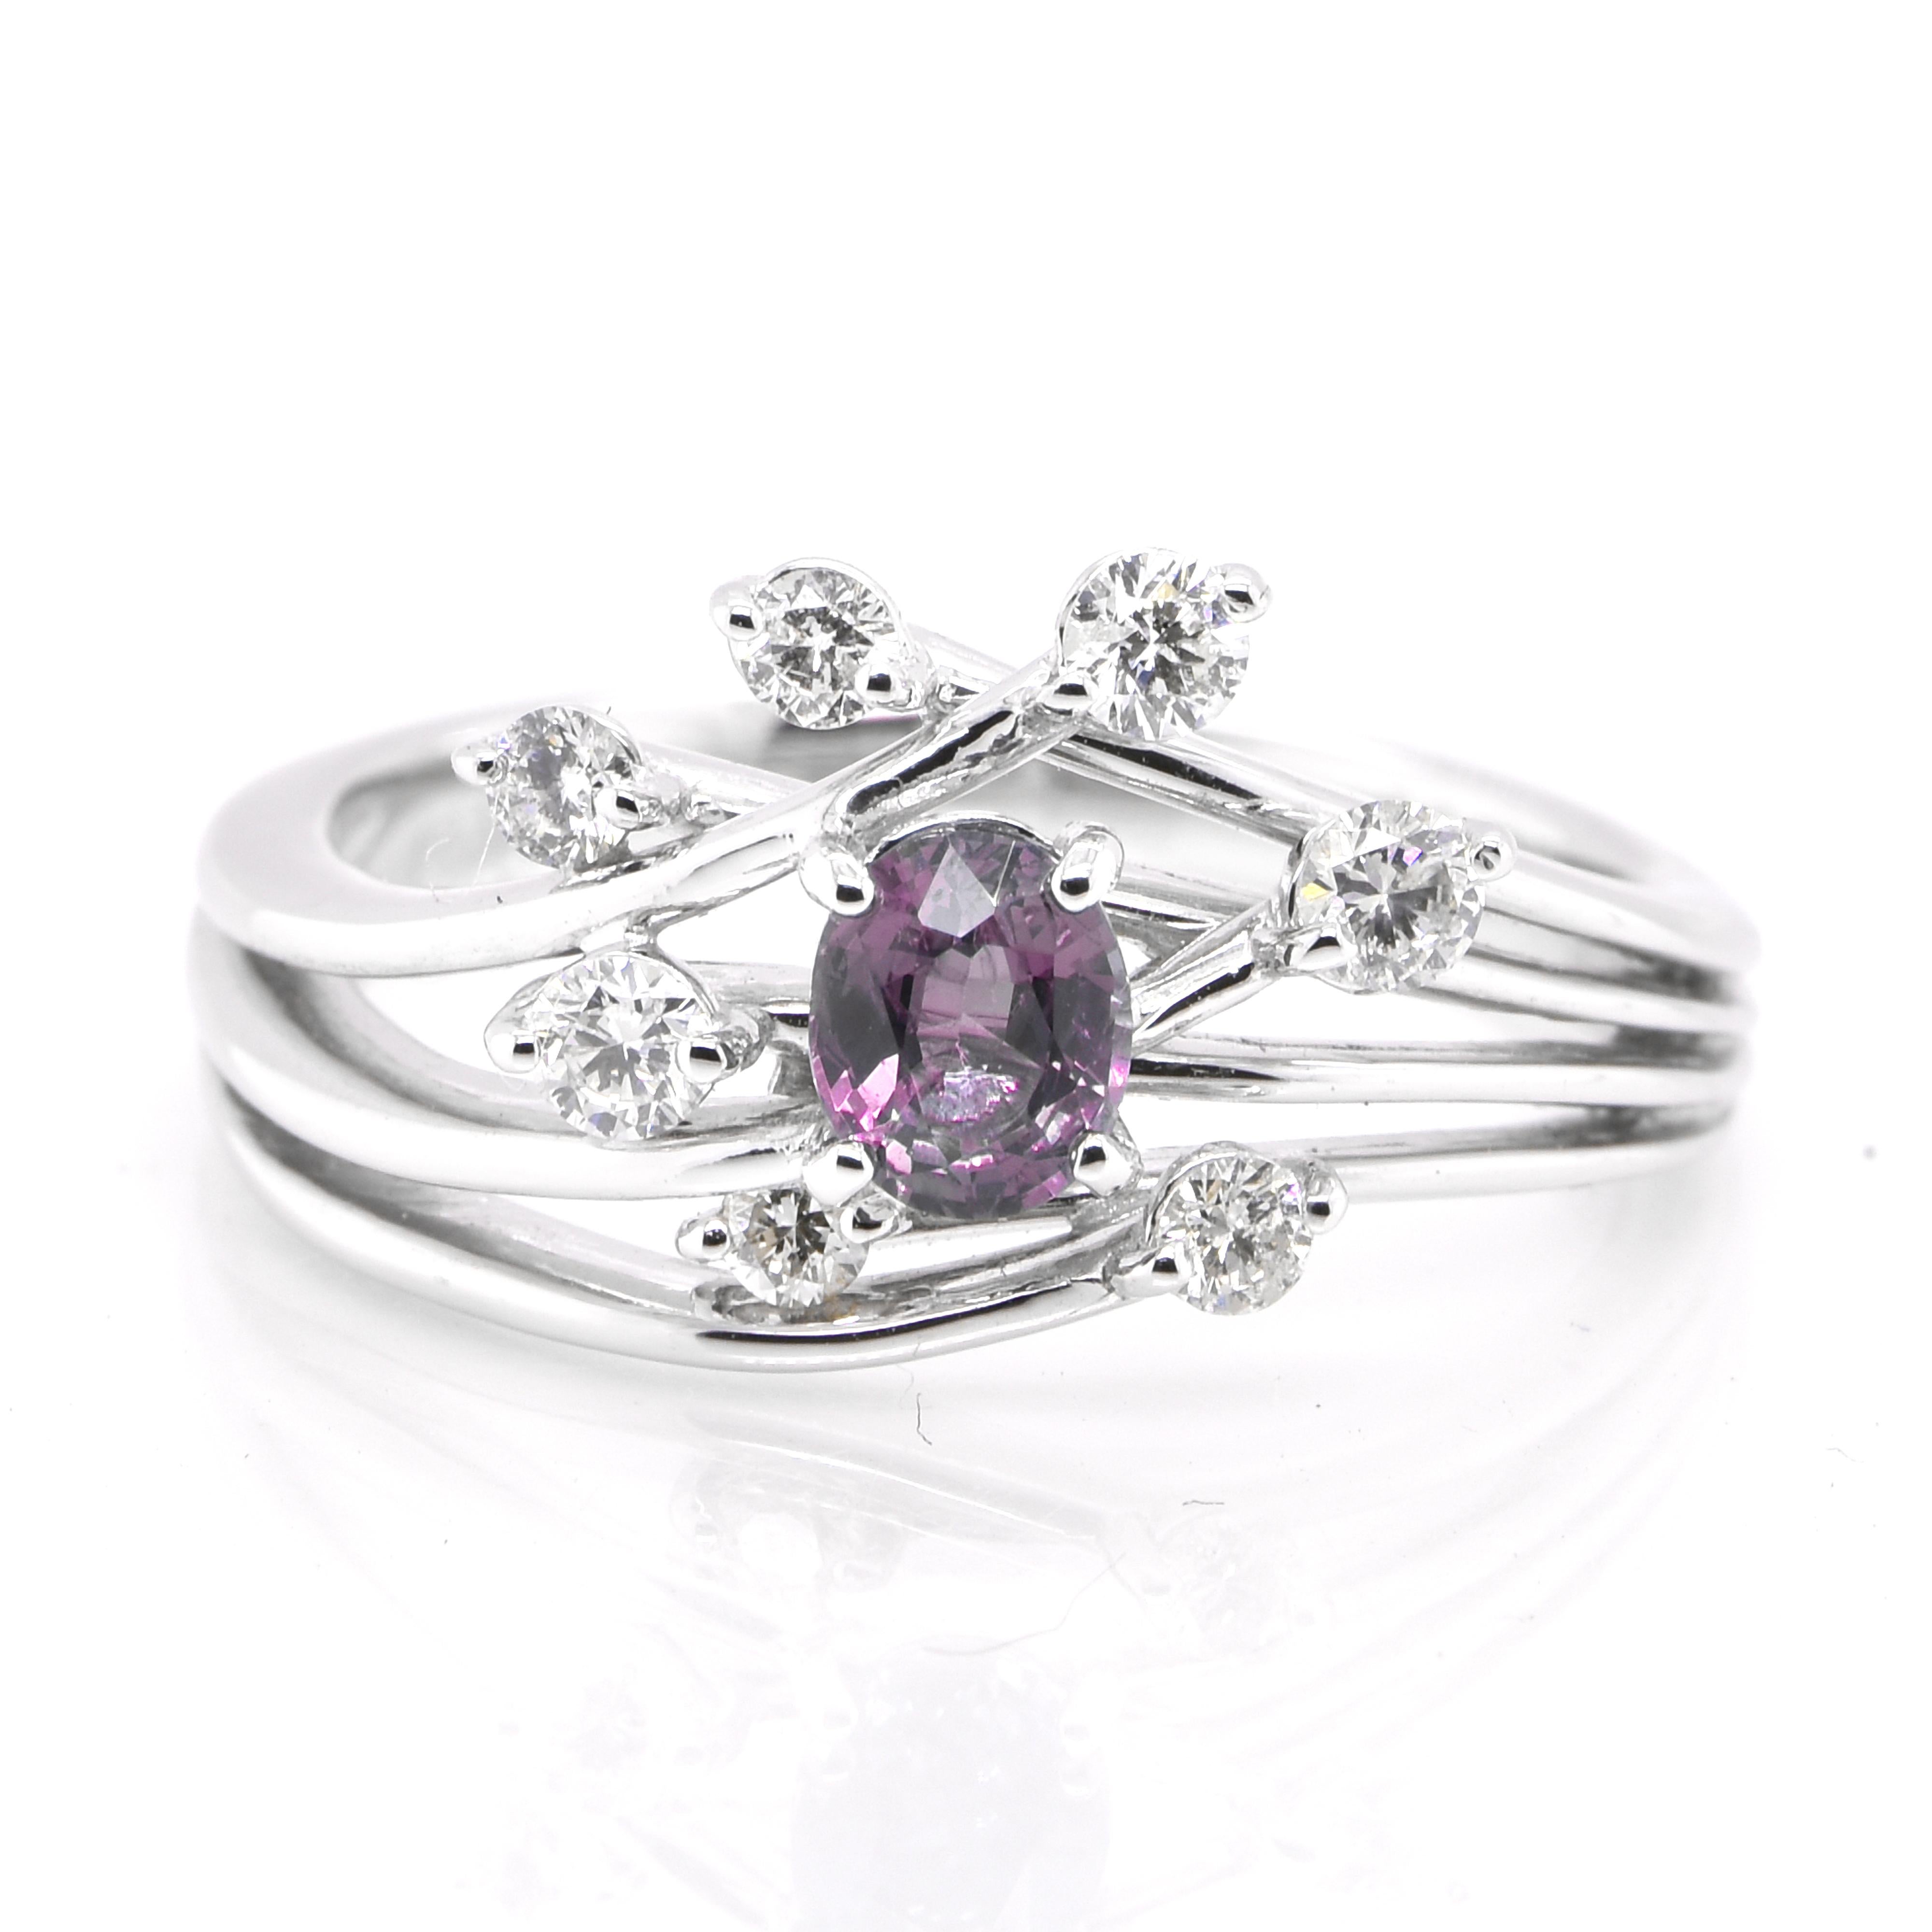 A gorgeous ring featuring a 0.45 Carat, Natural Alexandrite and 0.31 Carats of Diamond Accents set in Platinum. Alexandrites produce a natural color-change phenomenon as they exhibit a Bluish Green Color under Fluorescent Light whereas a Purplish